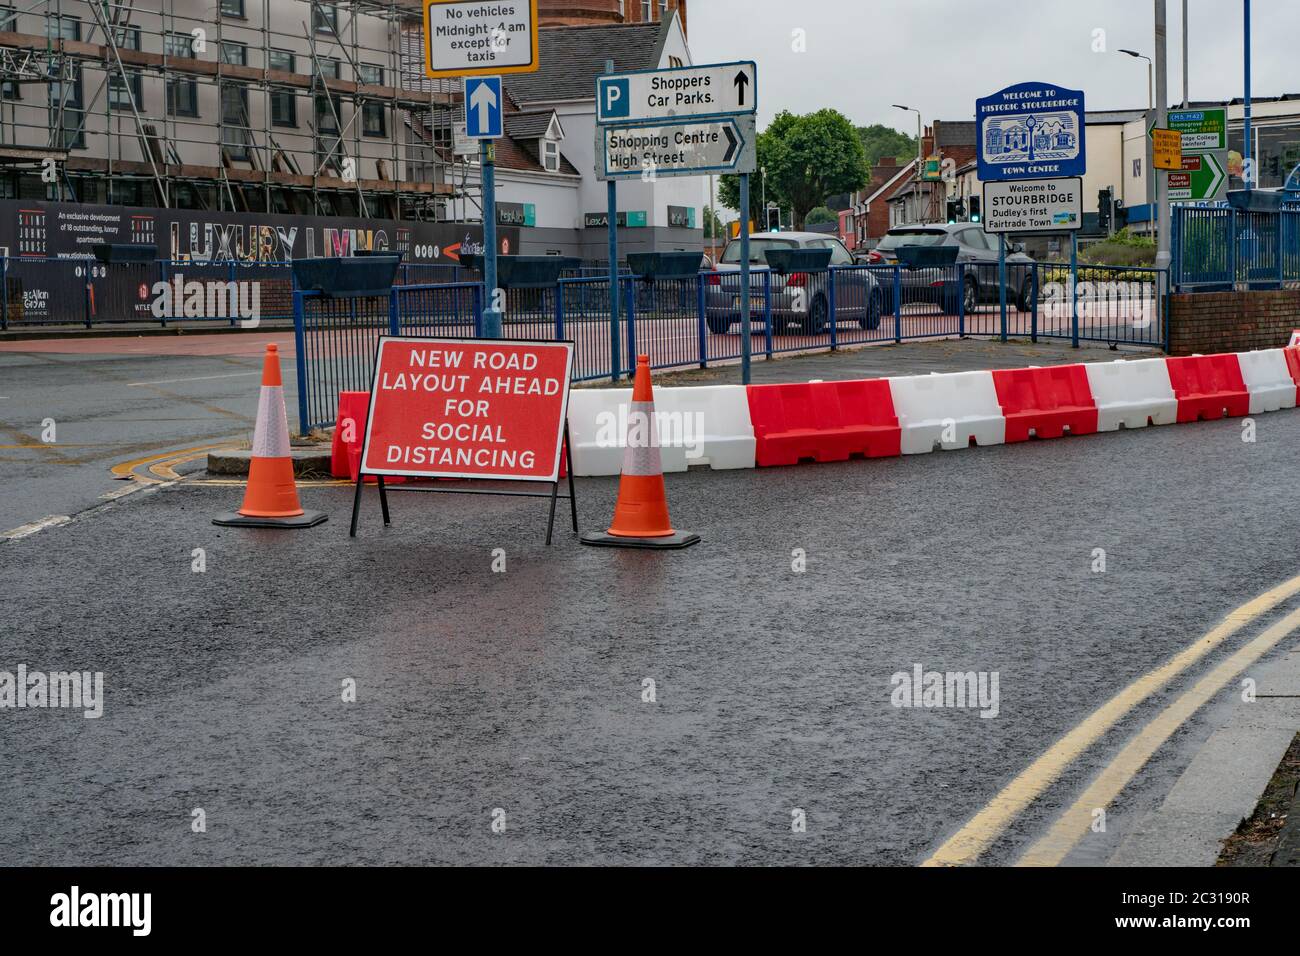 New Road layout ahead sign for social distancing. Stourbridge. West Midlands. UK Stock Photo